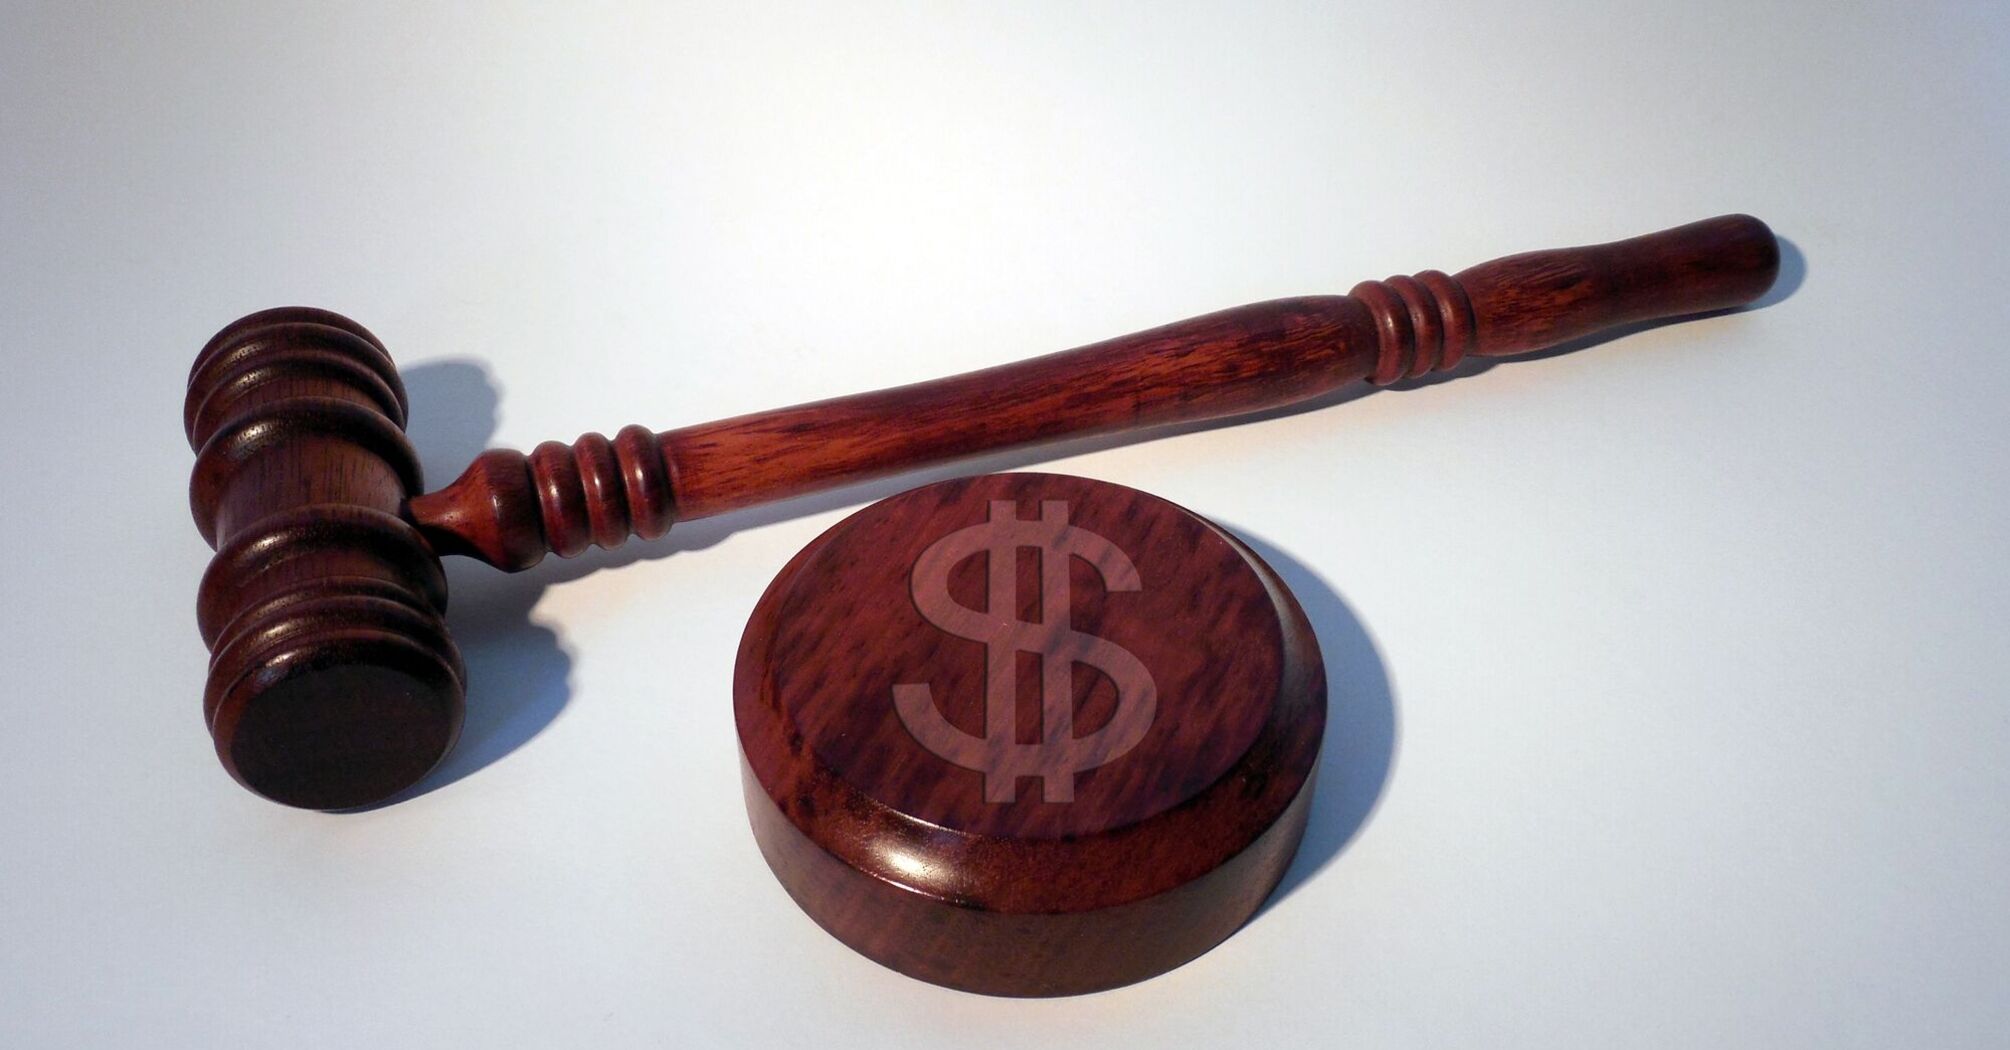 A wooden judge's gavel lying on top of a wooden block with a dollar sign symbol engraved on it 